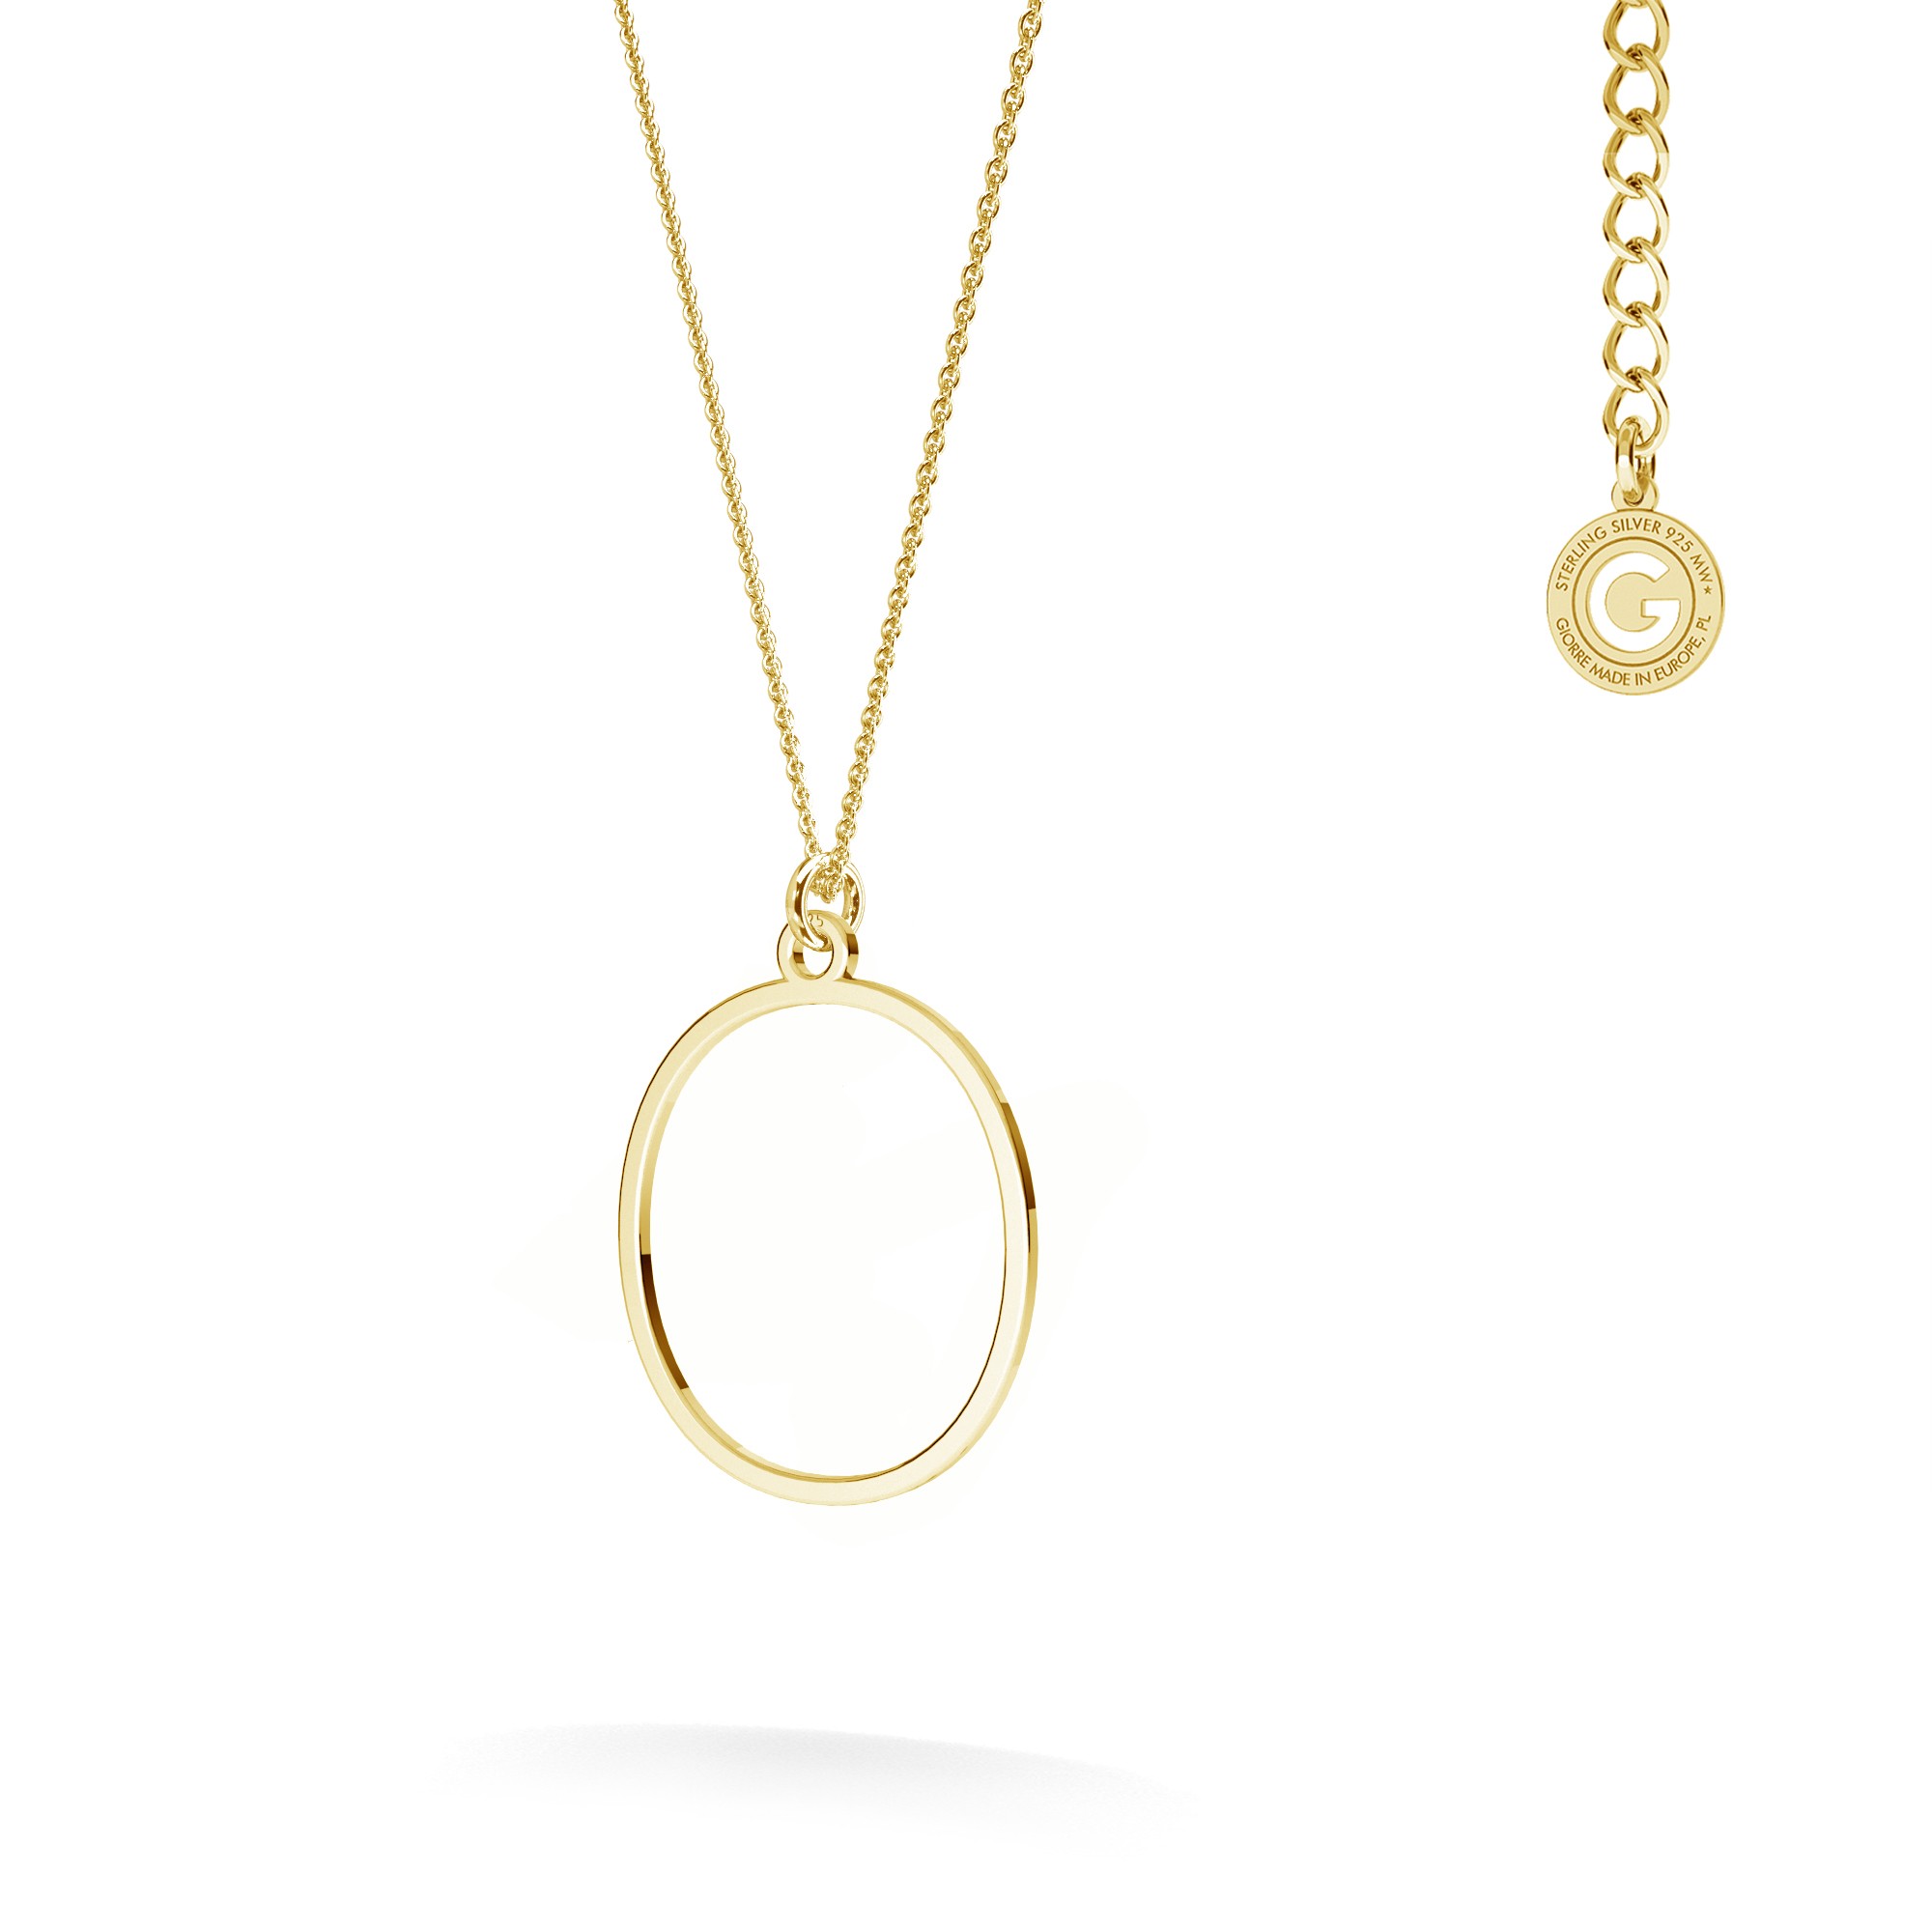 Giorre Woman's Necklace 34009O